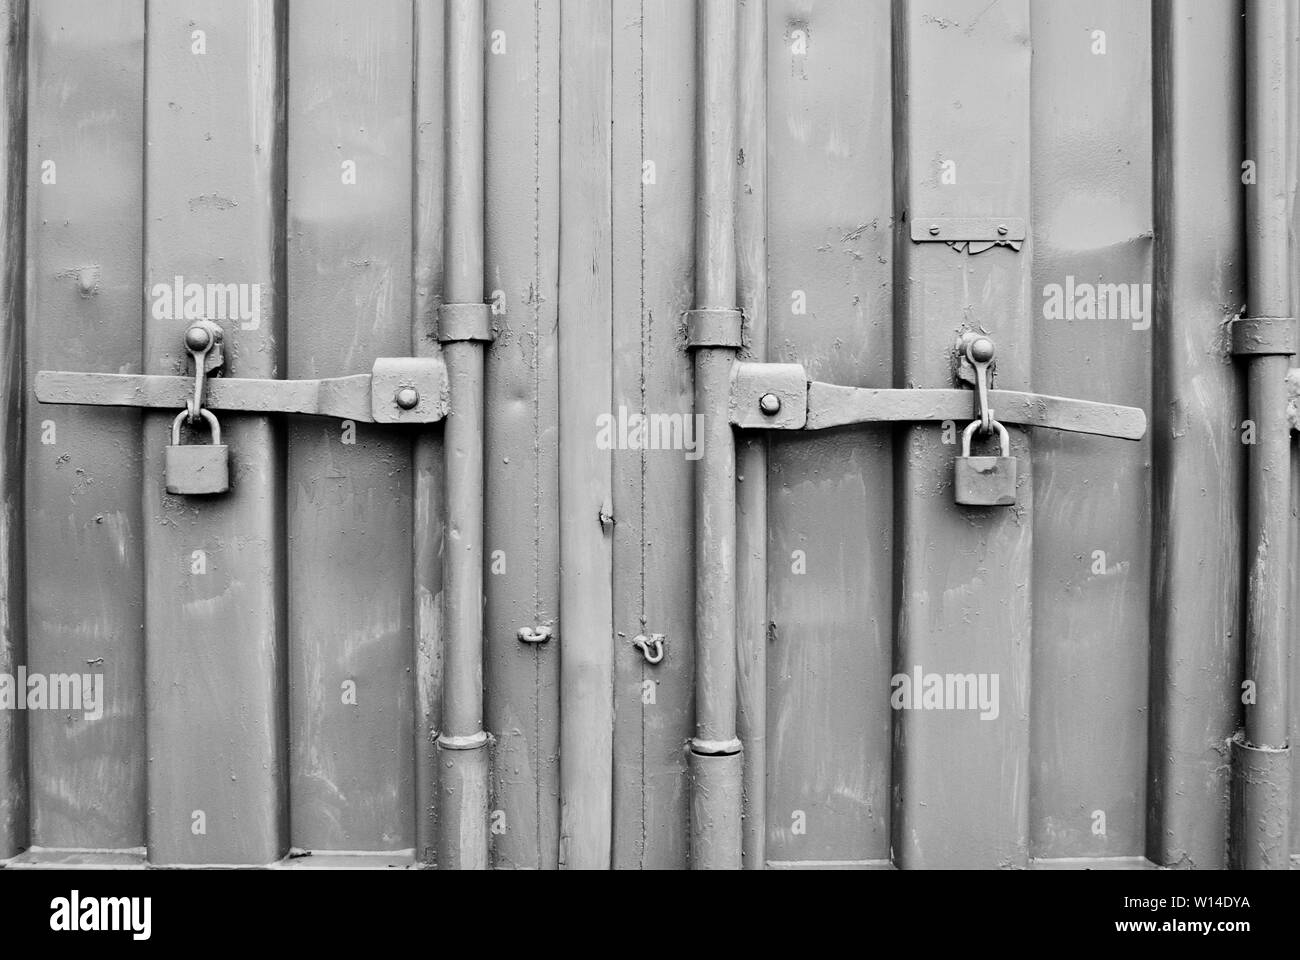 metal gray industrial container doors with locks Stock Photo